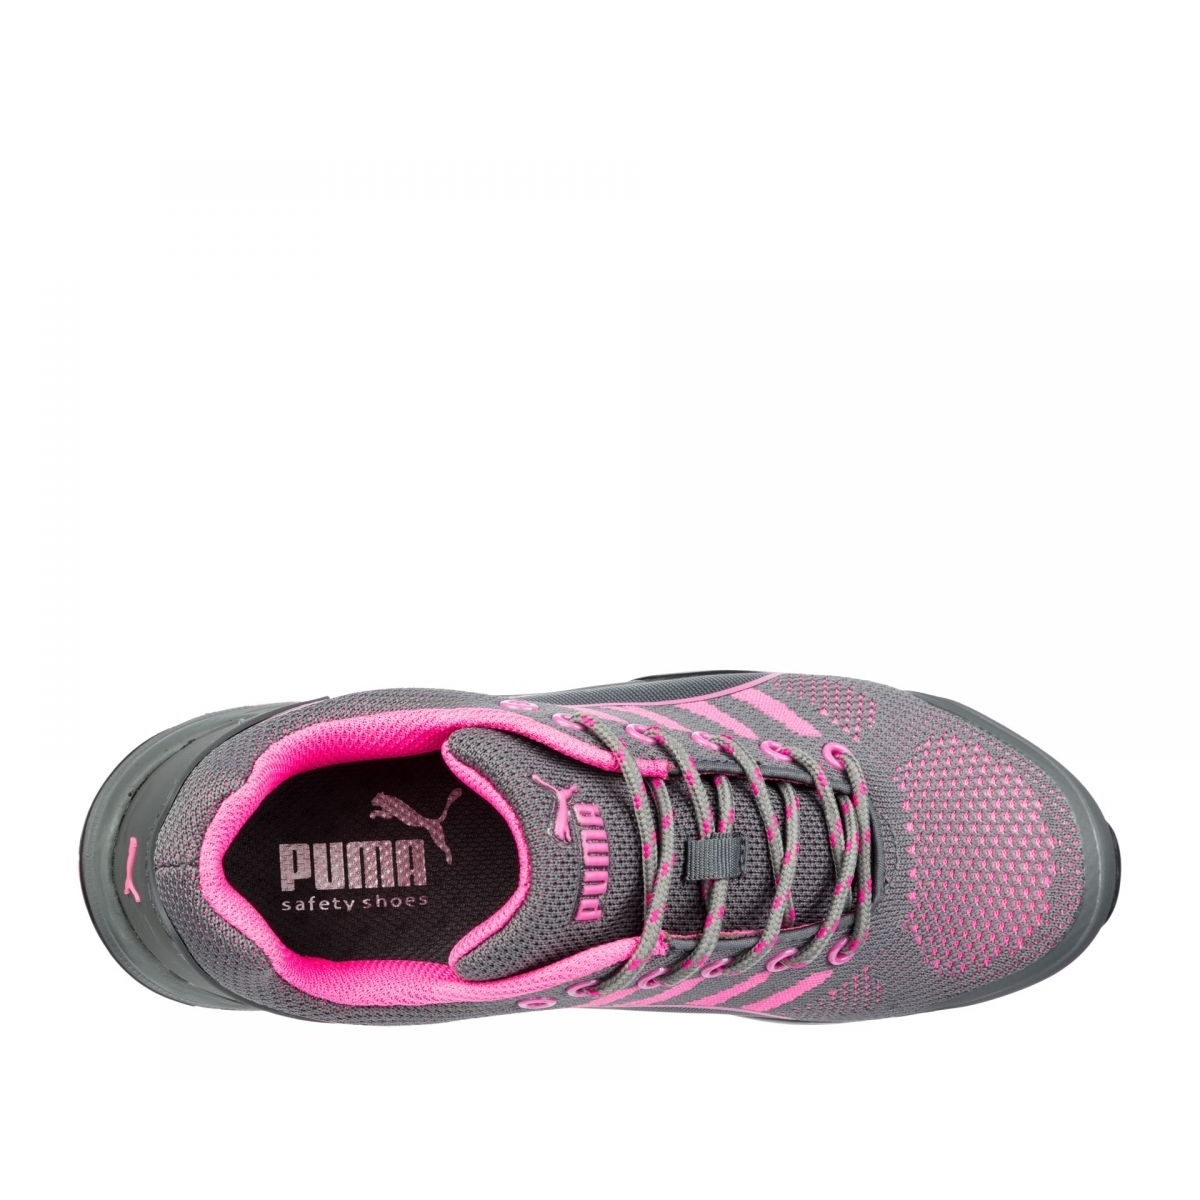 PUMA Safety Women's Celerity Knit Low Steel Toe ESD Work Shoe Pink - 642915 ONE SIZE PINK - PINK, 10